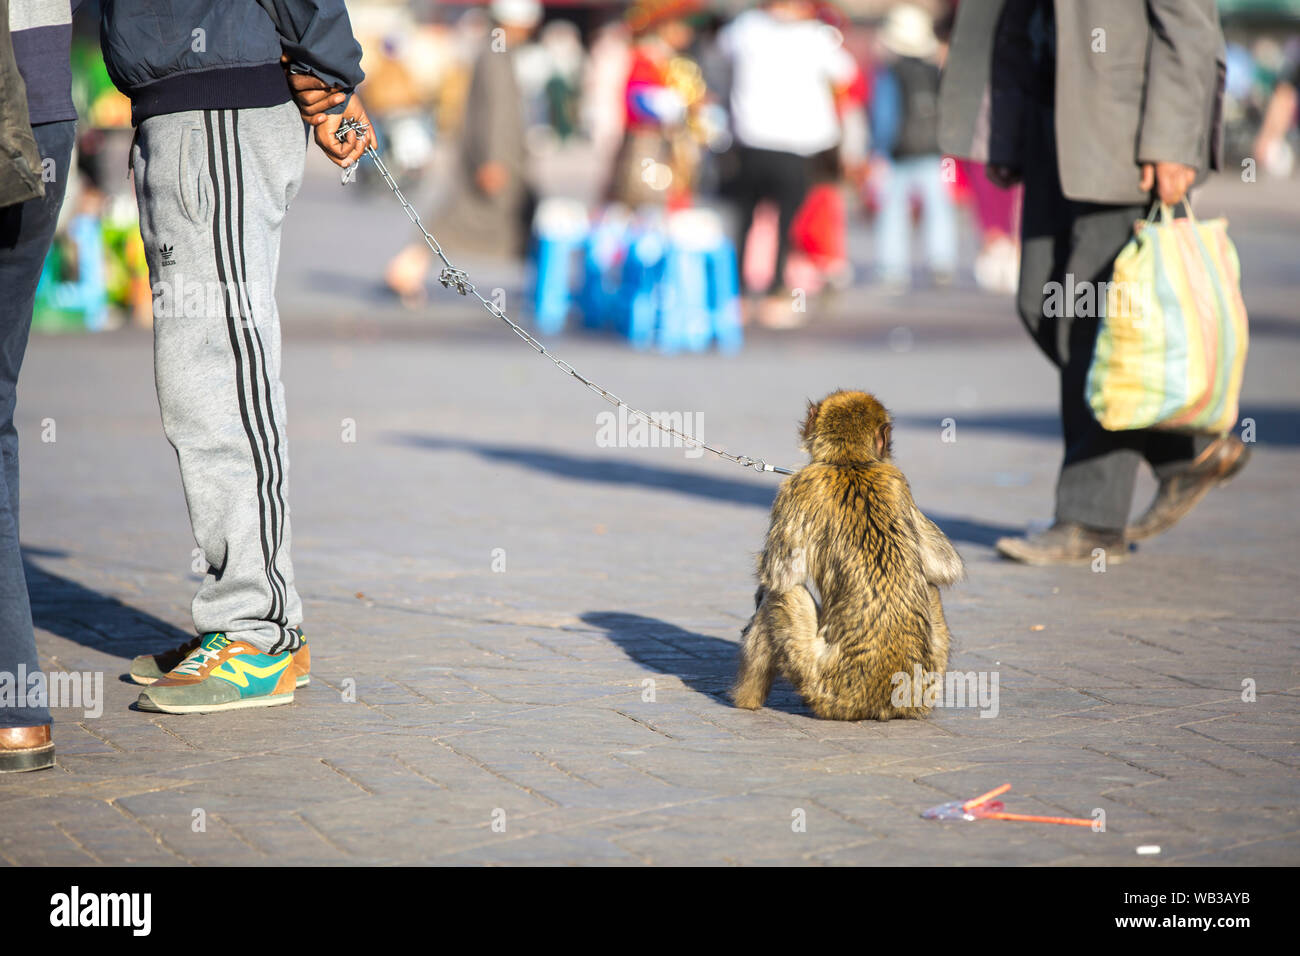 Marrakech, Morocco - March 12, 2019: Tourists taking photos with a monkey on a chain in Marrakech, Morocco. Stock Photo